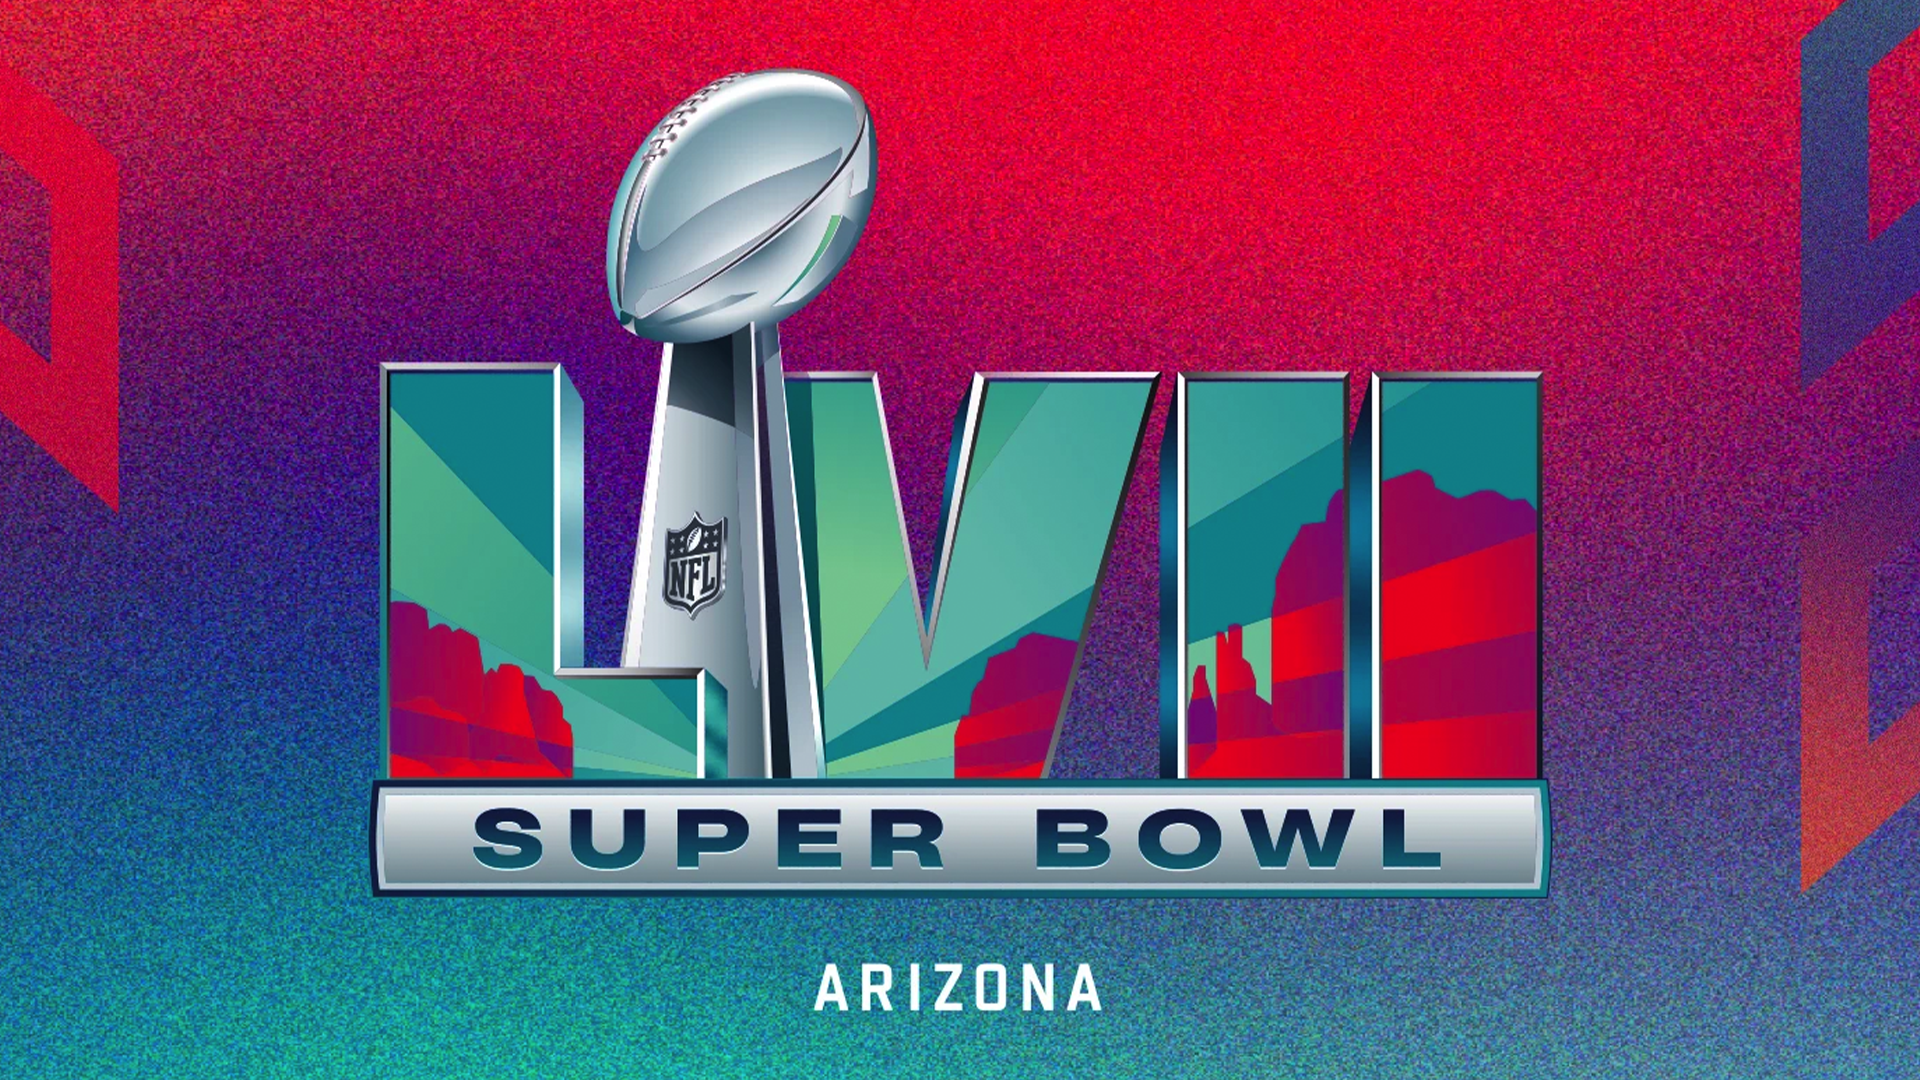 You'll be able to stream the Super Bowl for free (legally)